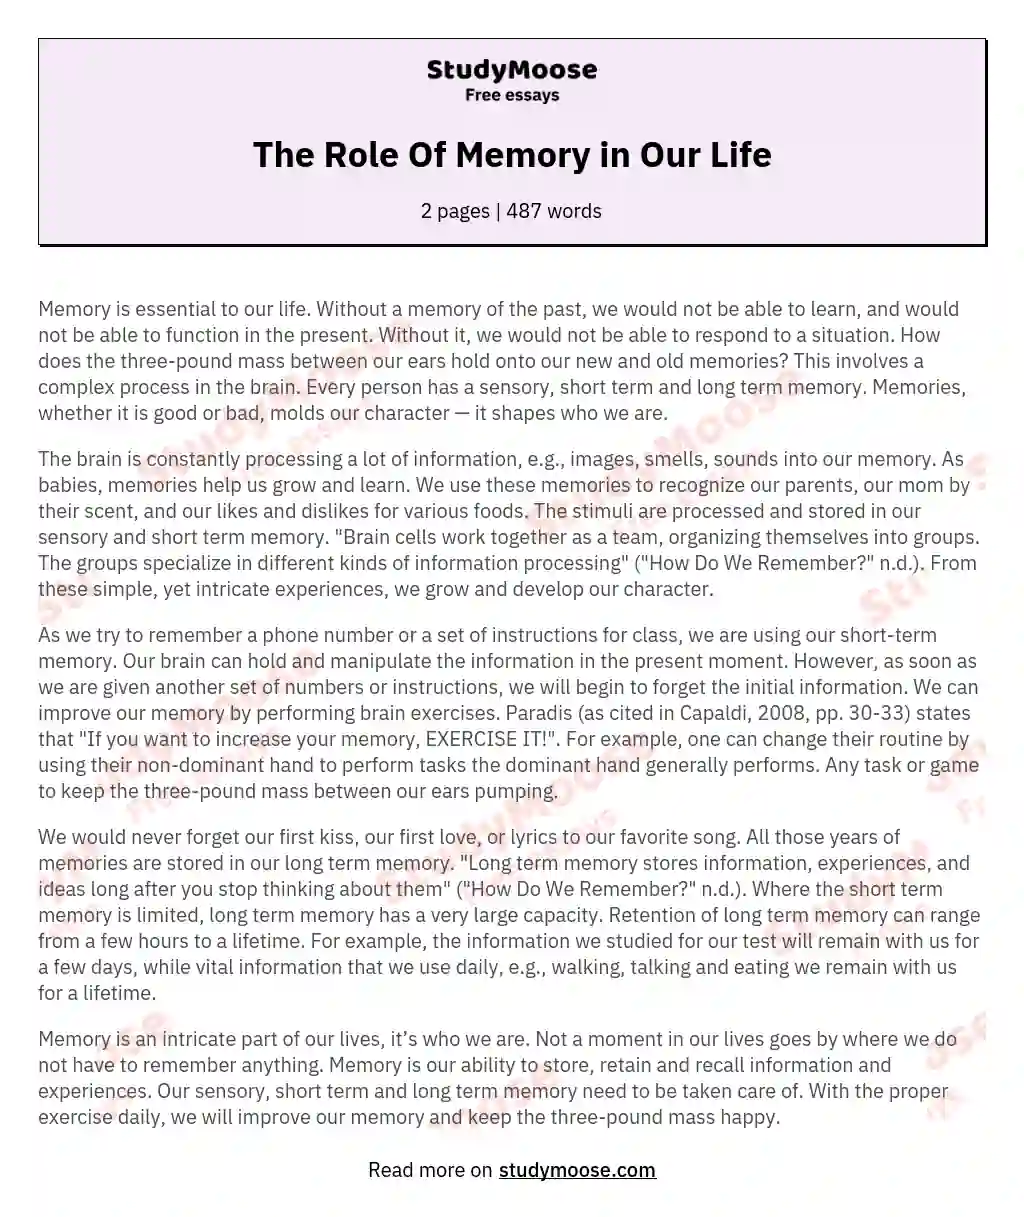 The Role Of Memory in Our Life essay